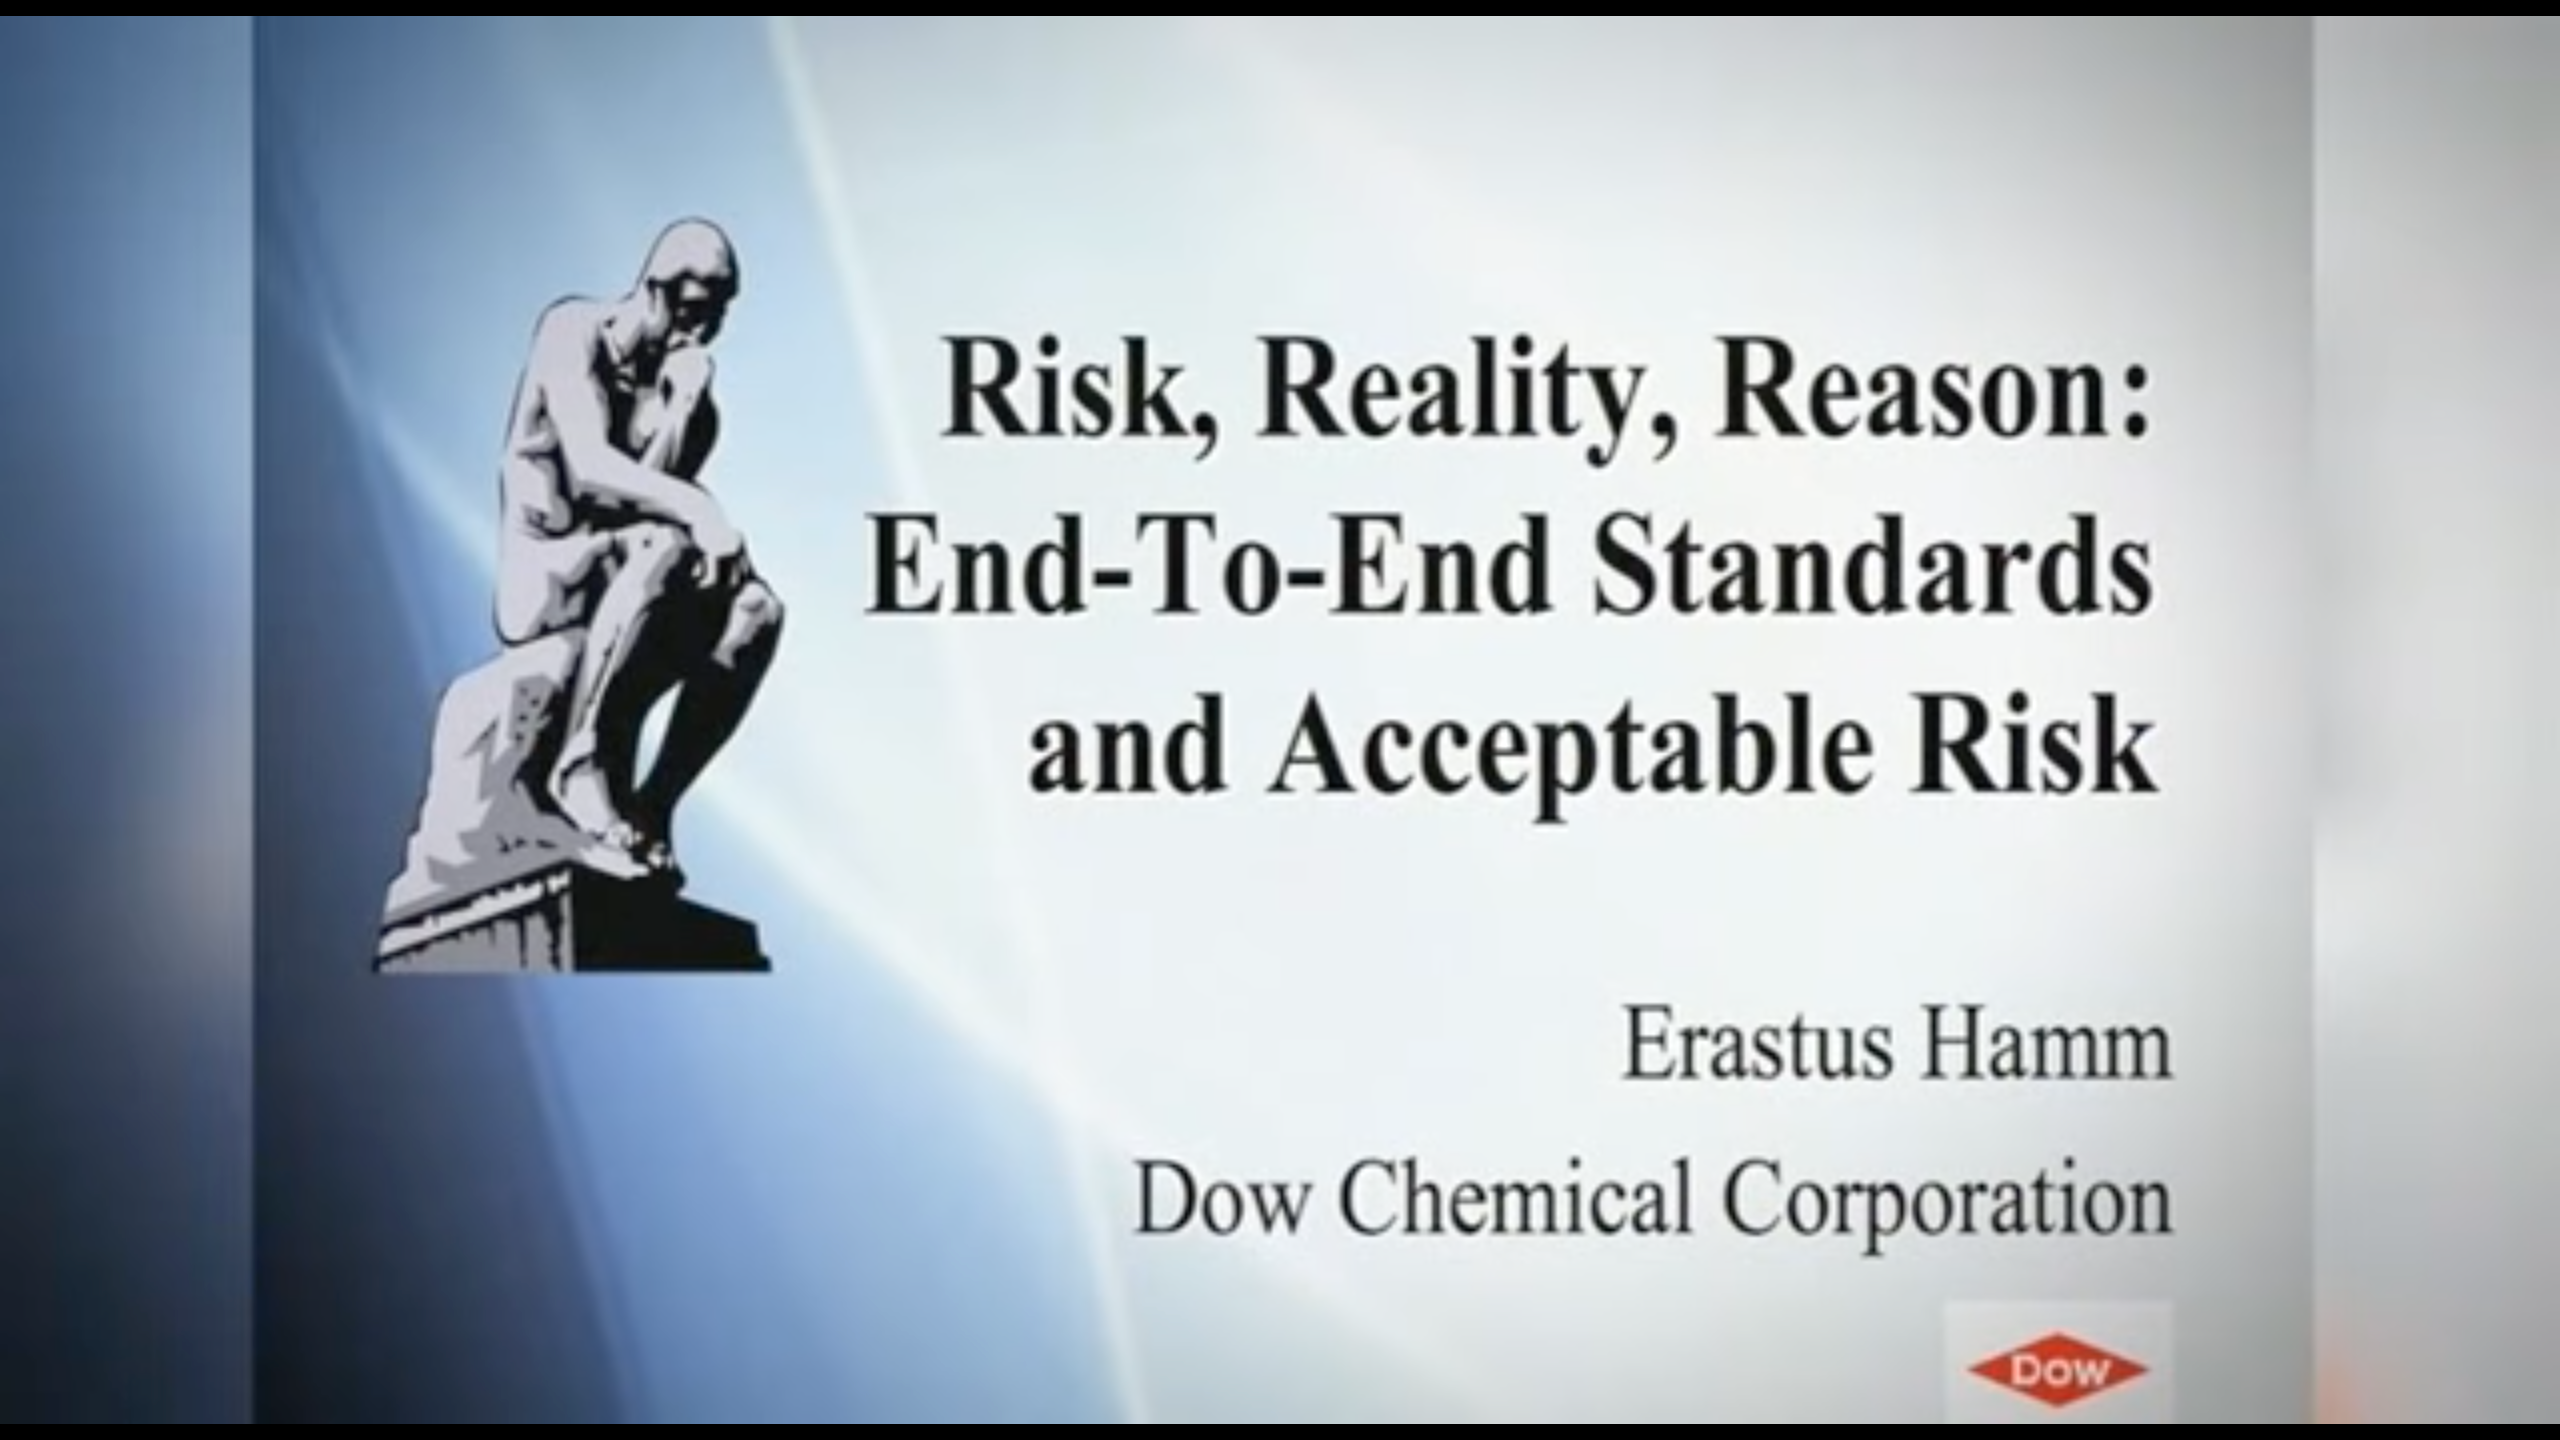 The title slide of a powerpoint presented by the Yes Men posing as members of Dow Chemical Corporation